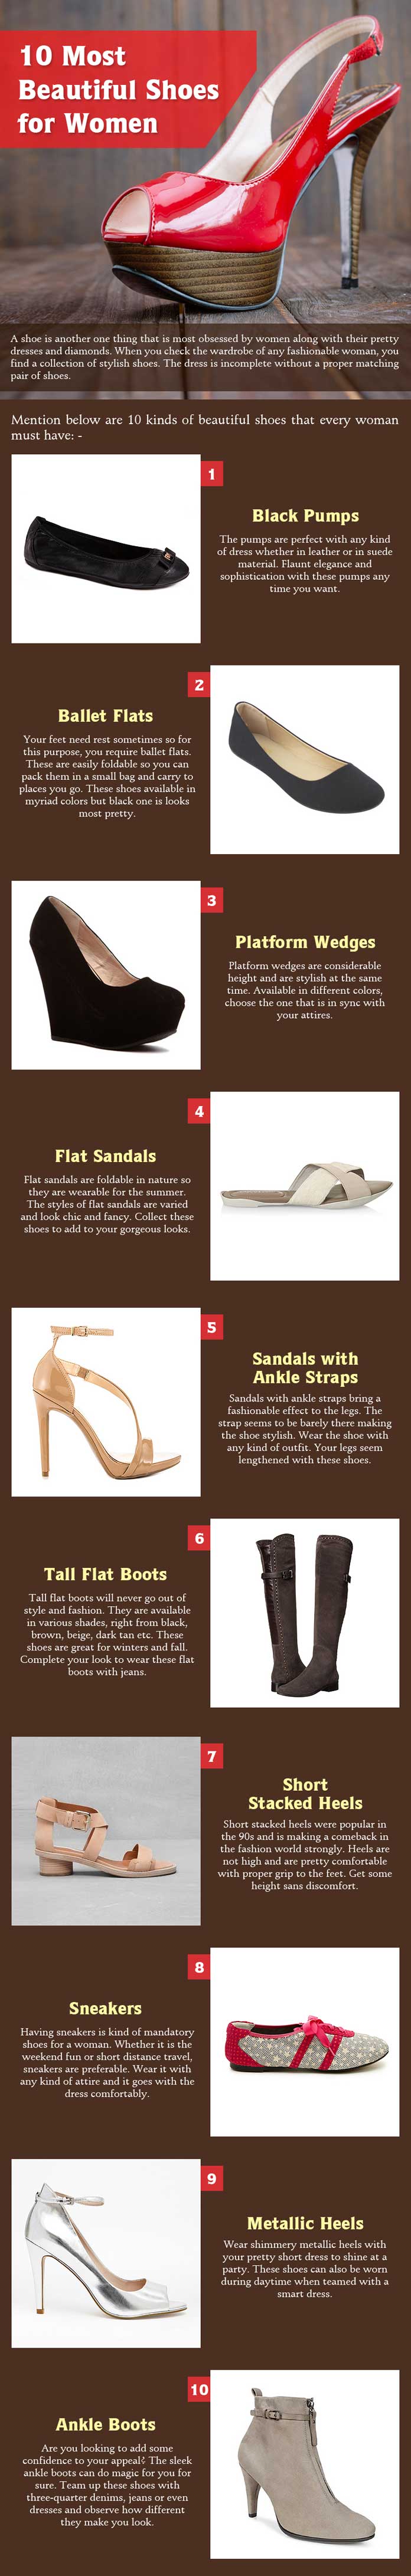 10-Most-Beautiful-Shoes-for-Women